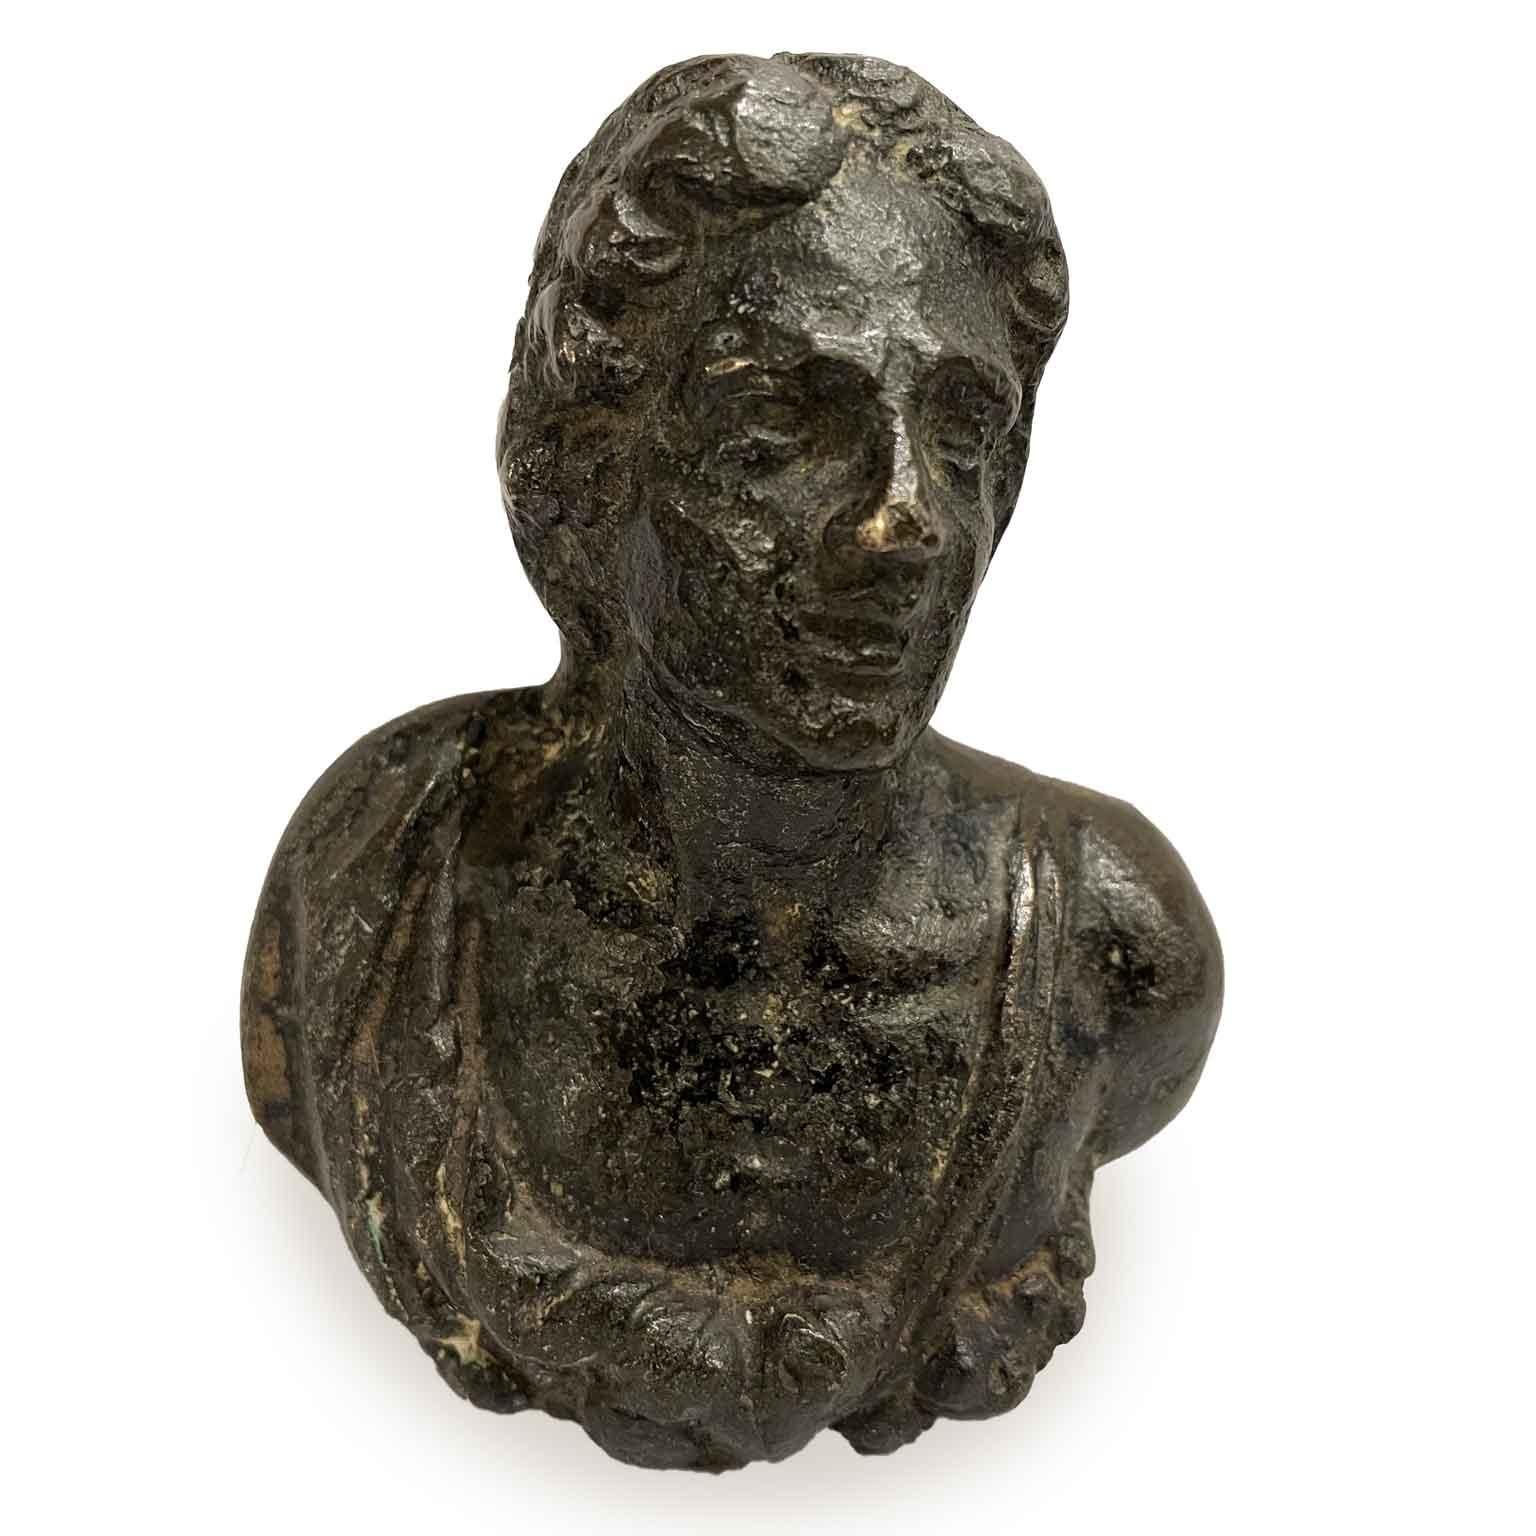 Iron Bust From 1600 depicting a boy with curly hair, dressed in a tunic that leaves one shoulder uncovered. Made of cast iron, the pommel has a dark patina and is in good condition, consistent with a date of four centuries.  This antique bronze knob